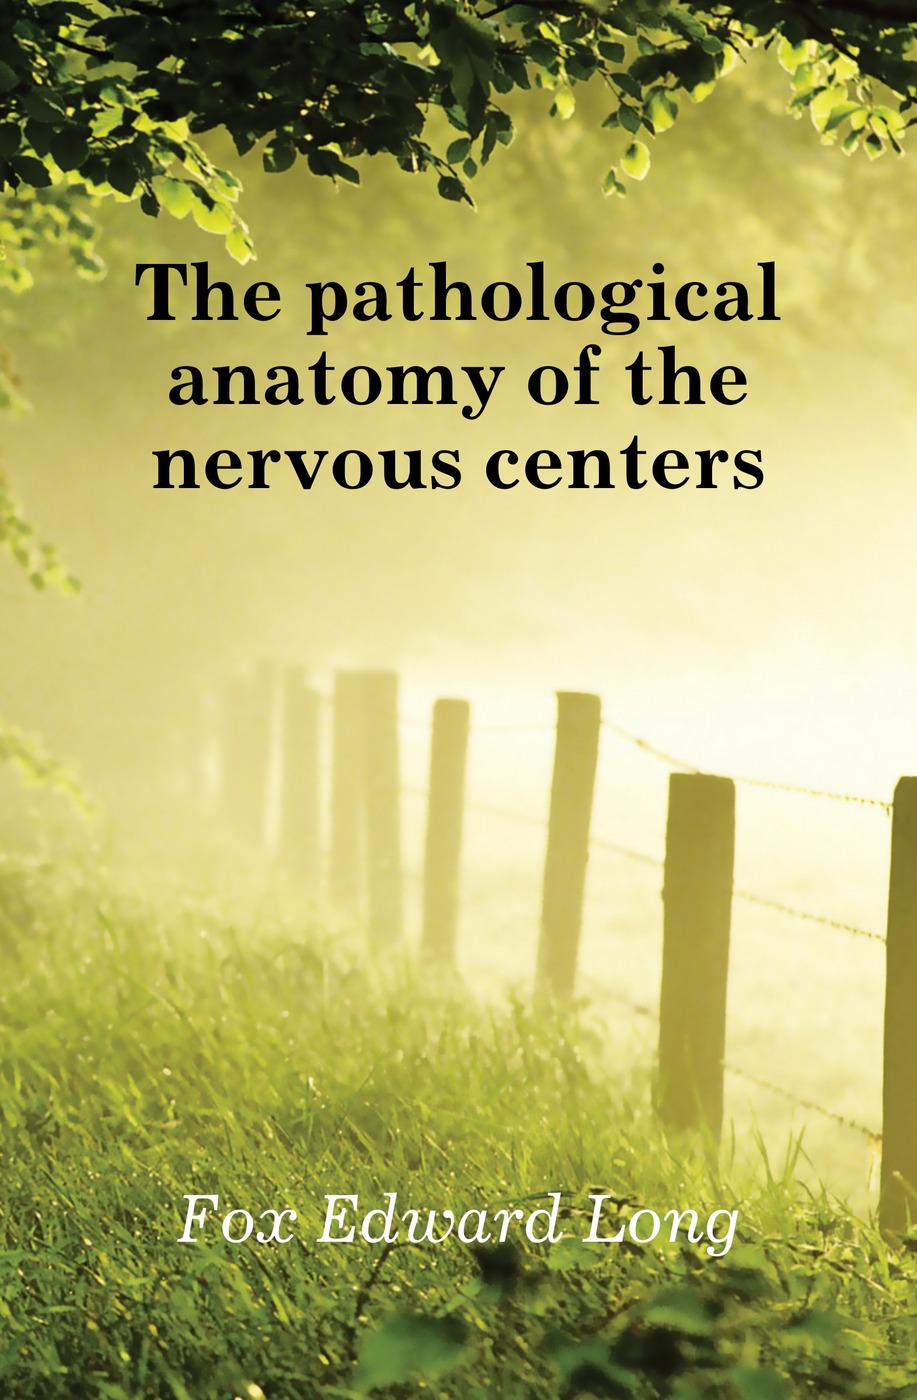 The pathological anatomy of the nervous centers